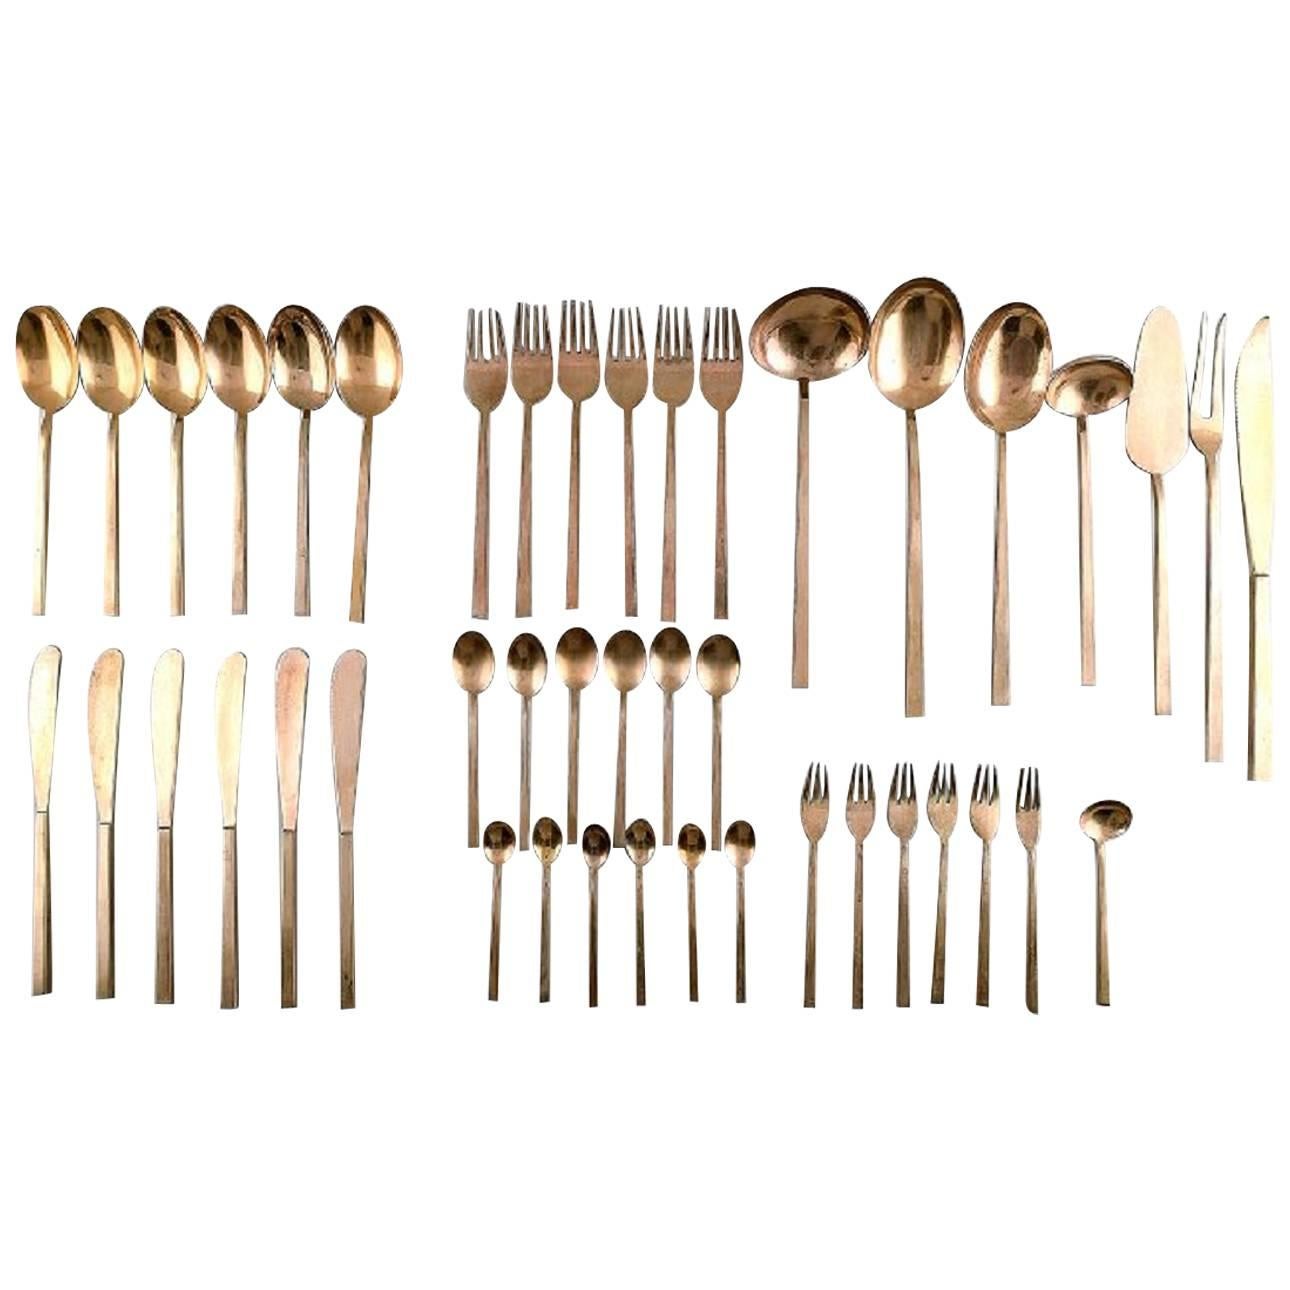 Sigvard Bernadotte 'Scanline' Cutlery in Brass Complete for Six People